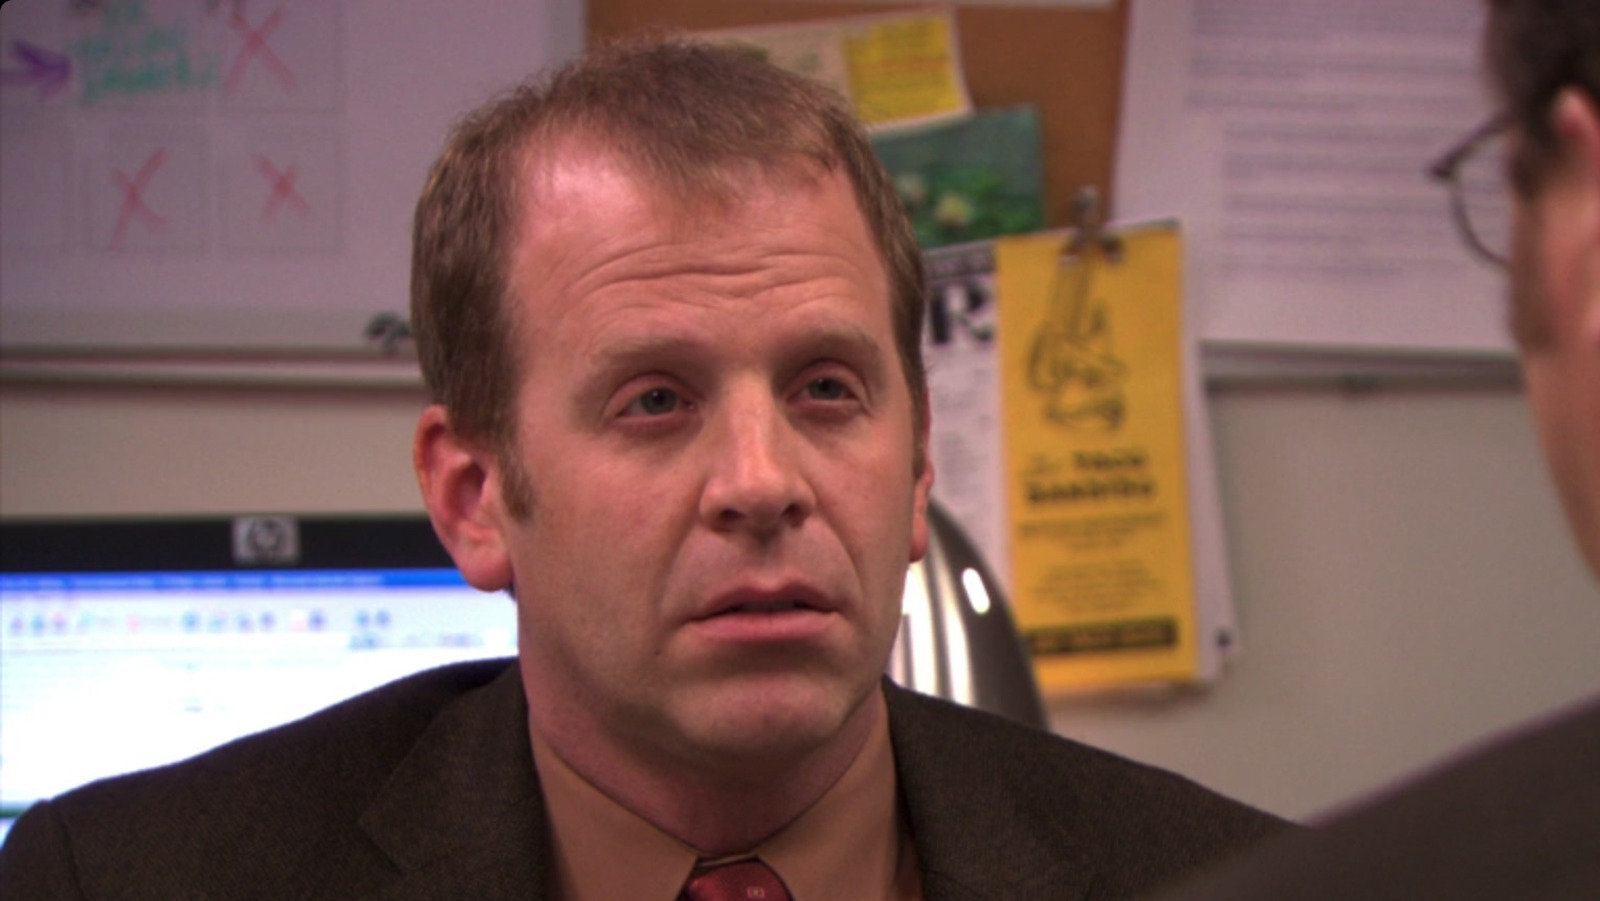 The Toby Continuity Mistake You Likely Missed On The Office